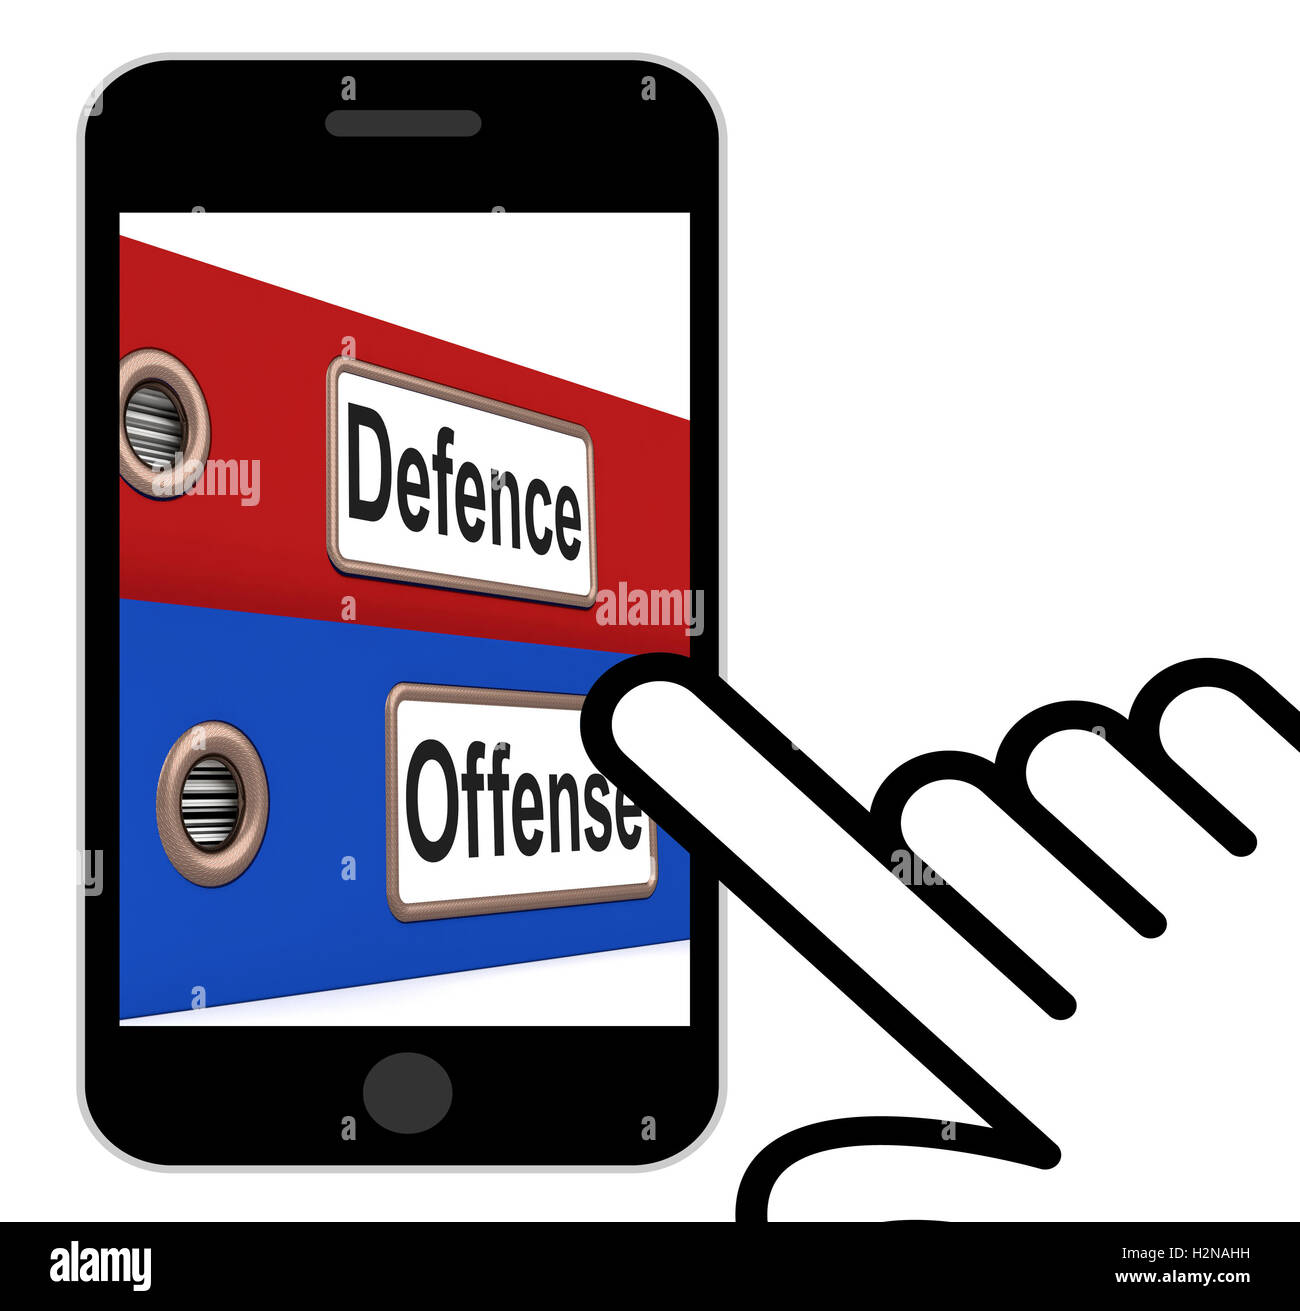 Defence Offense Folders Displaying Protect And Attack Stock Photo